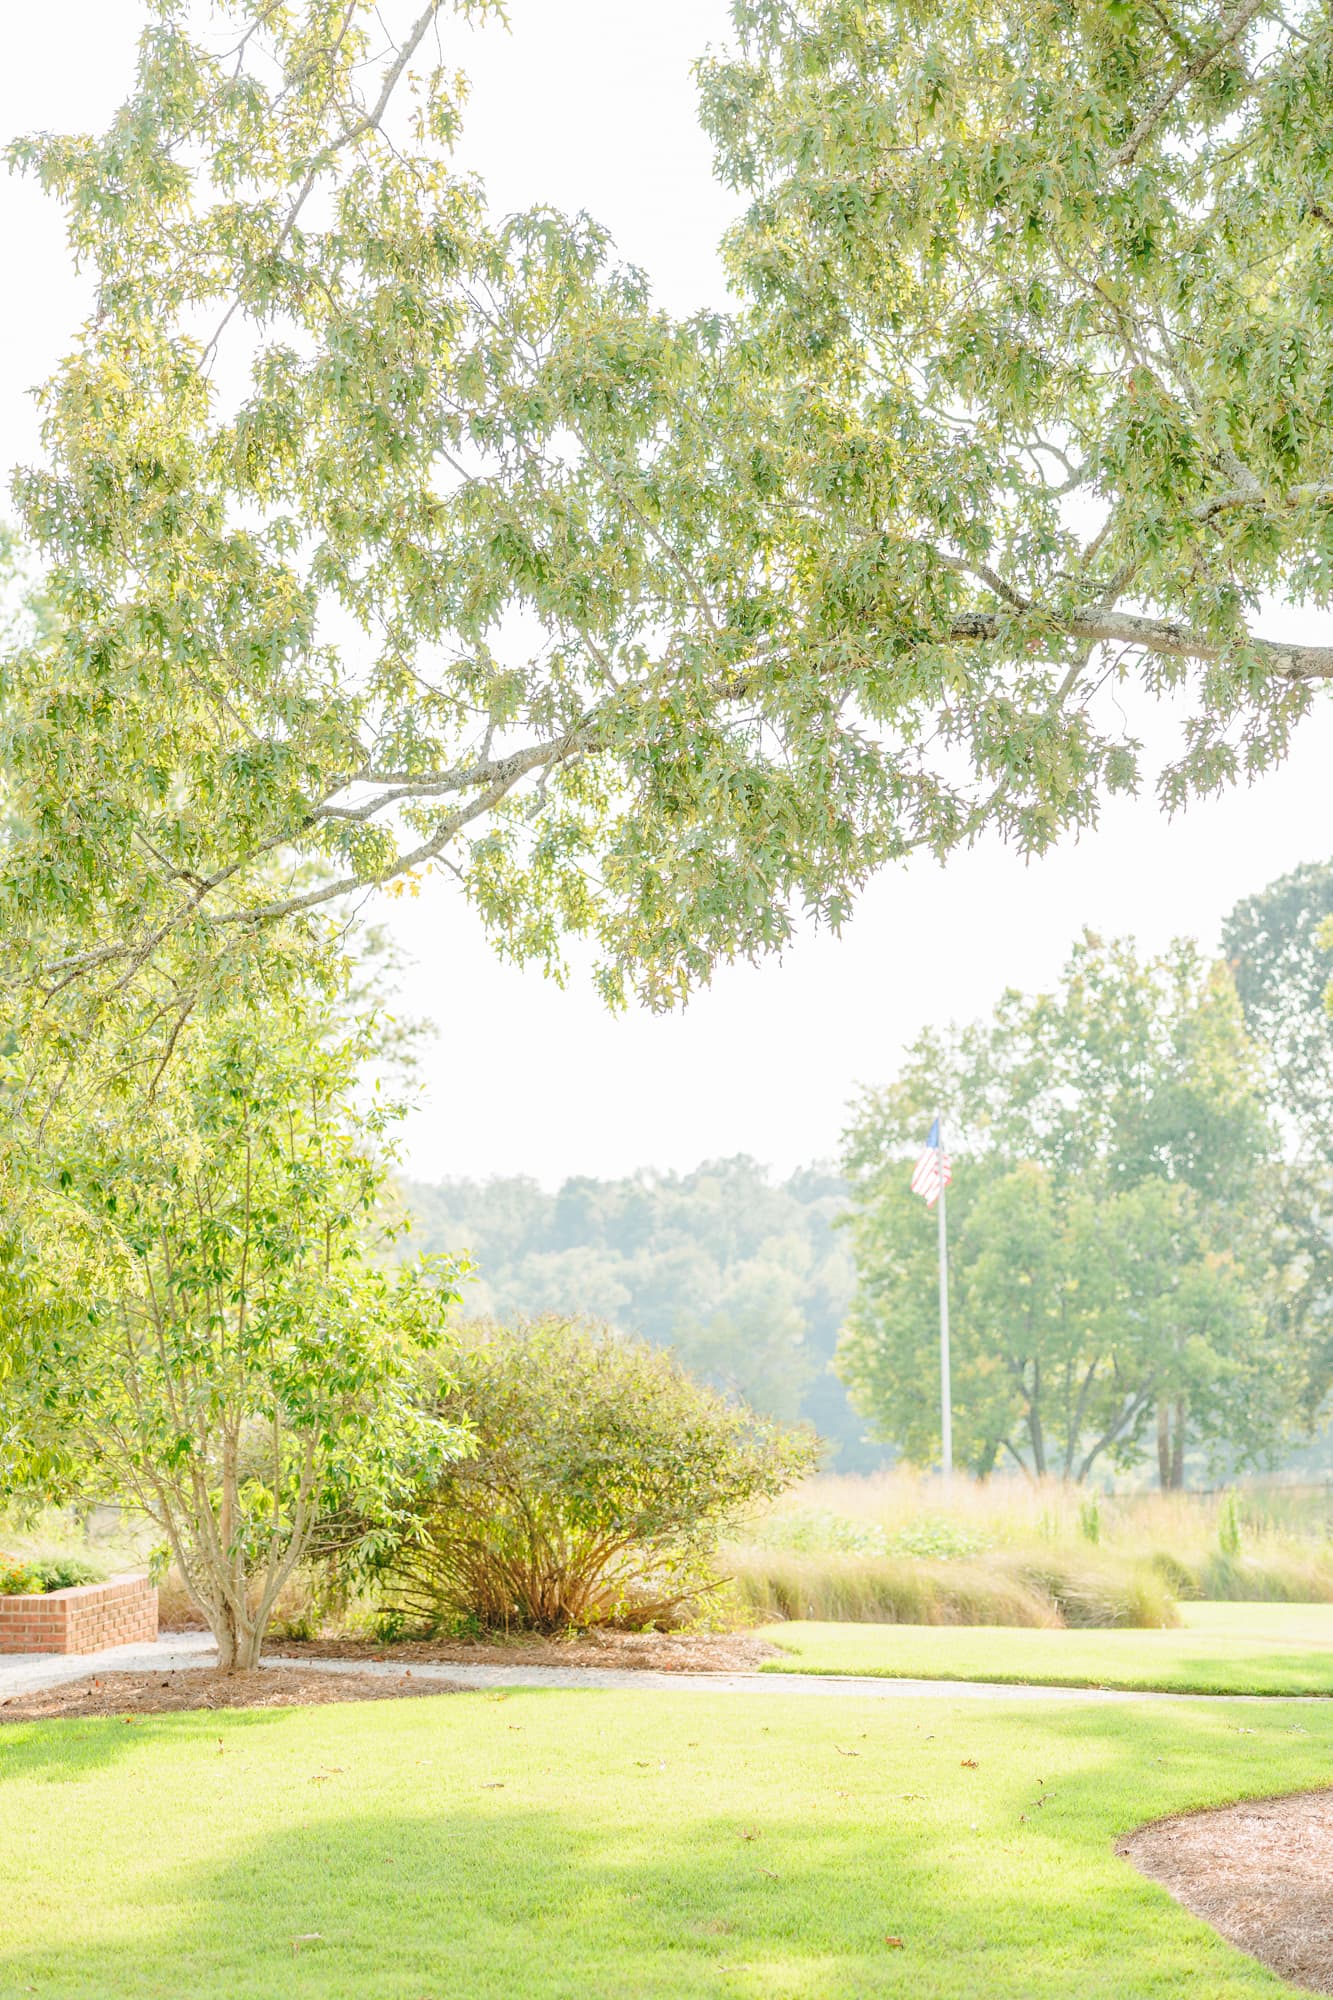 North Corner Haven provides a picturesque backdrop for Laura and Aaron's engagement session.